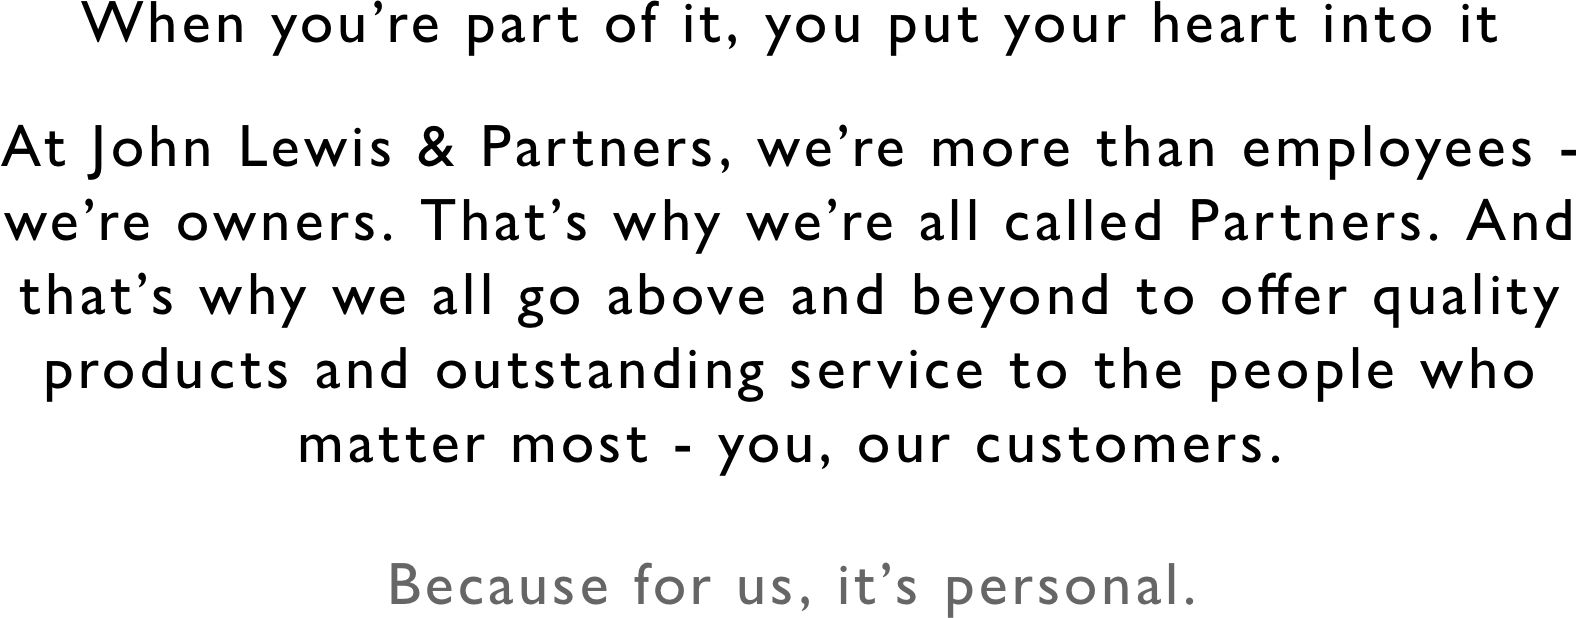 When you’re part of it, you put your heart into it At John Lewis & Partners, we’re more than employees - we’re owners. That’s why we’re all called Partners. And that’s why we all go above and beyond to offer quality products and outstanding service to the people who matter most - you, our customers. Because for us, it’s personal